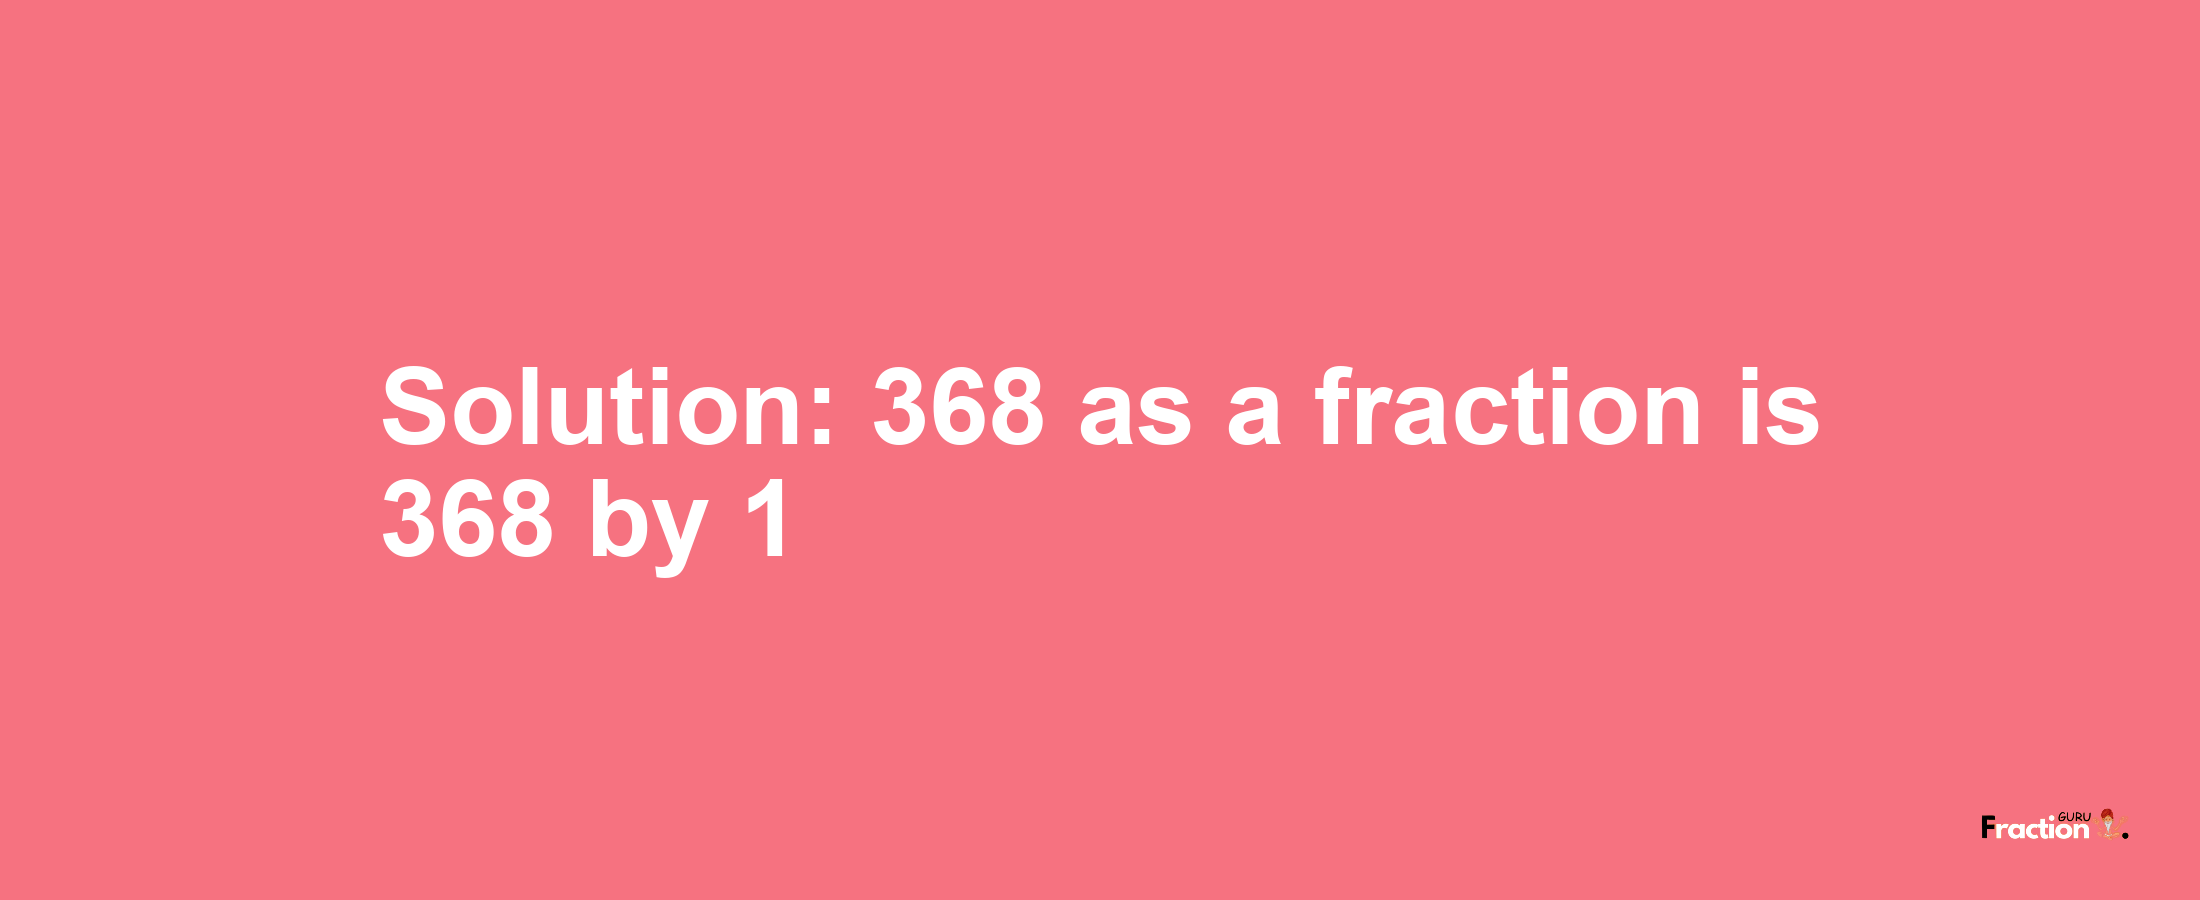 Solution:368 as a fraction is 368/1